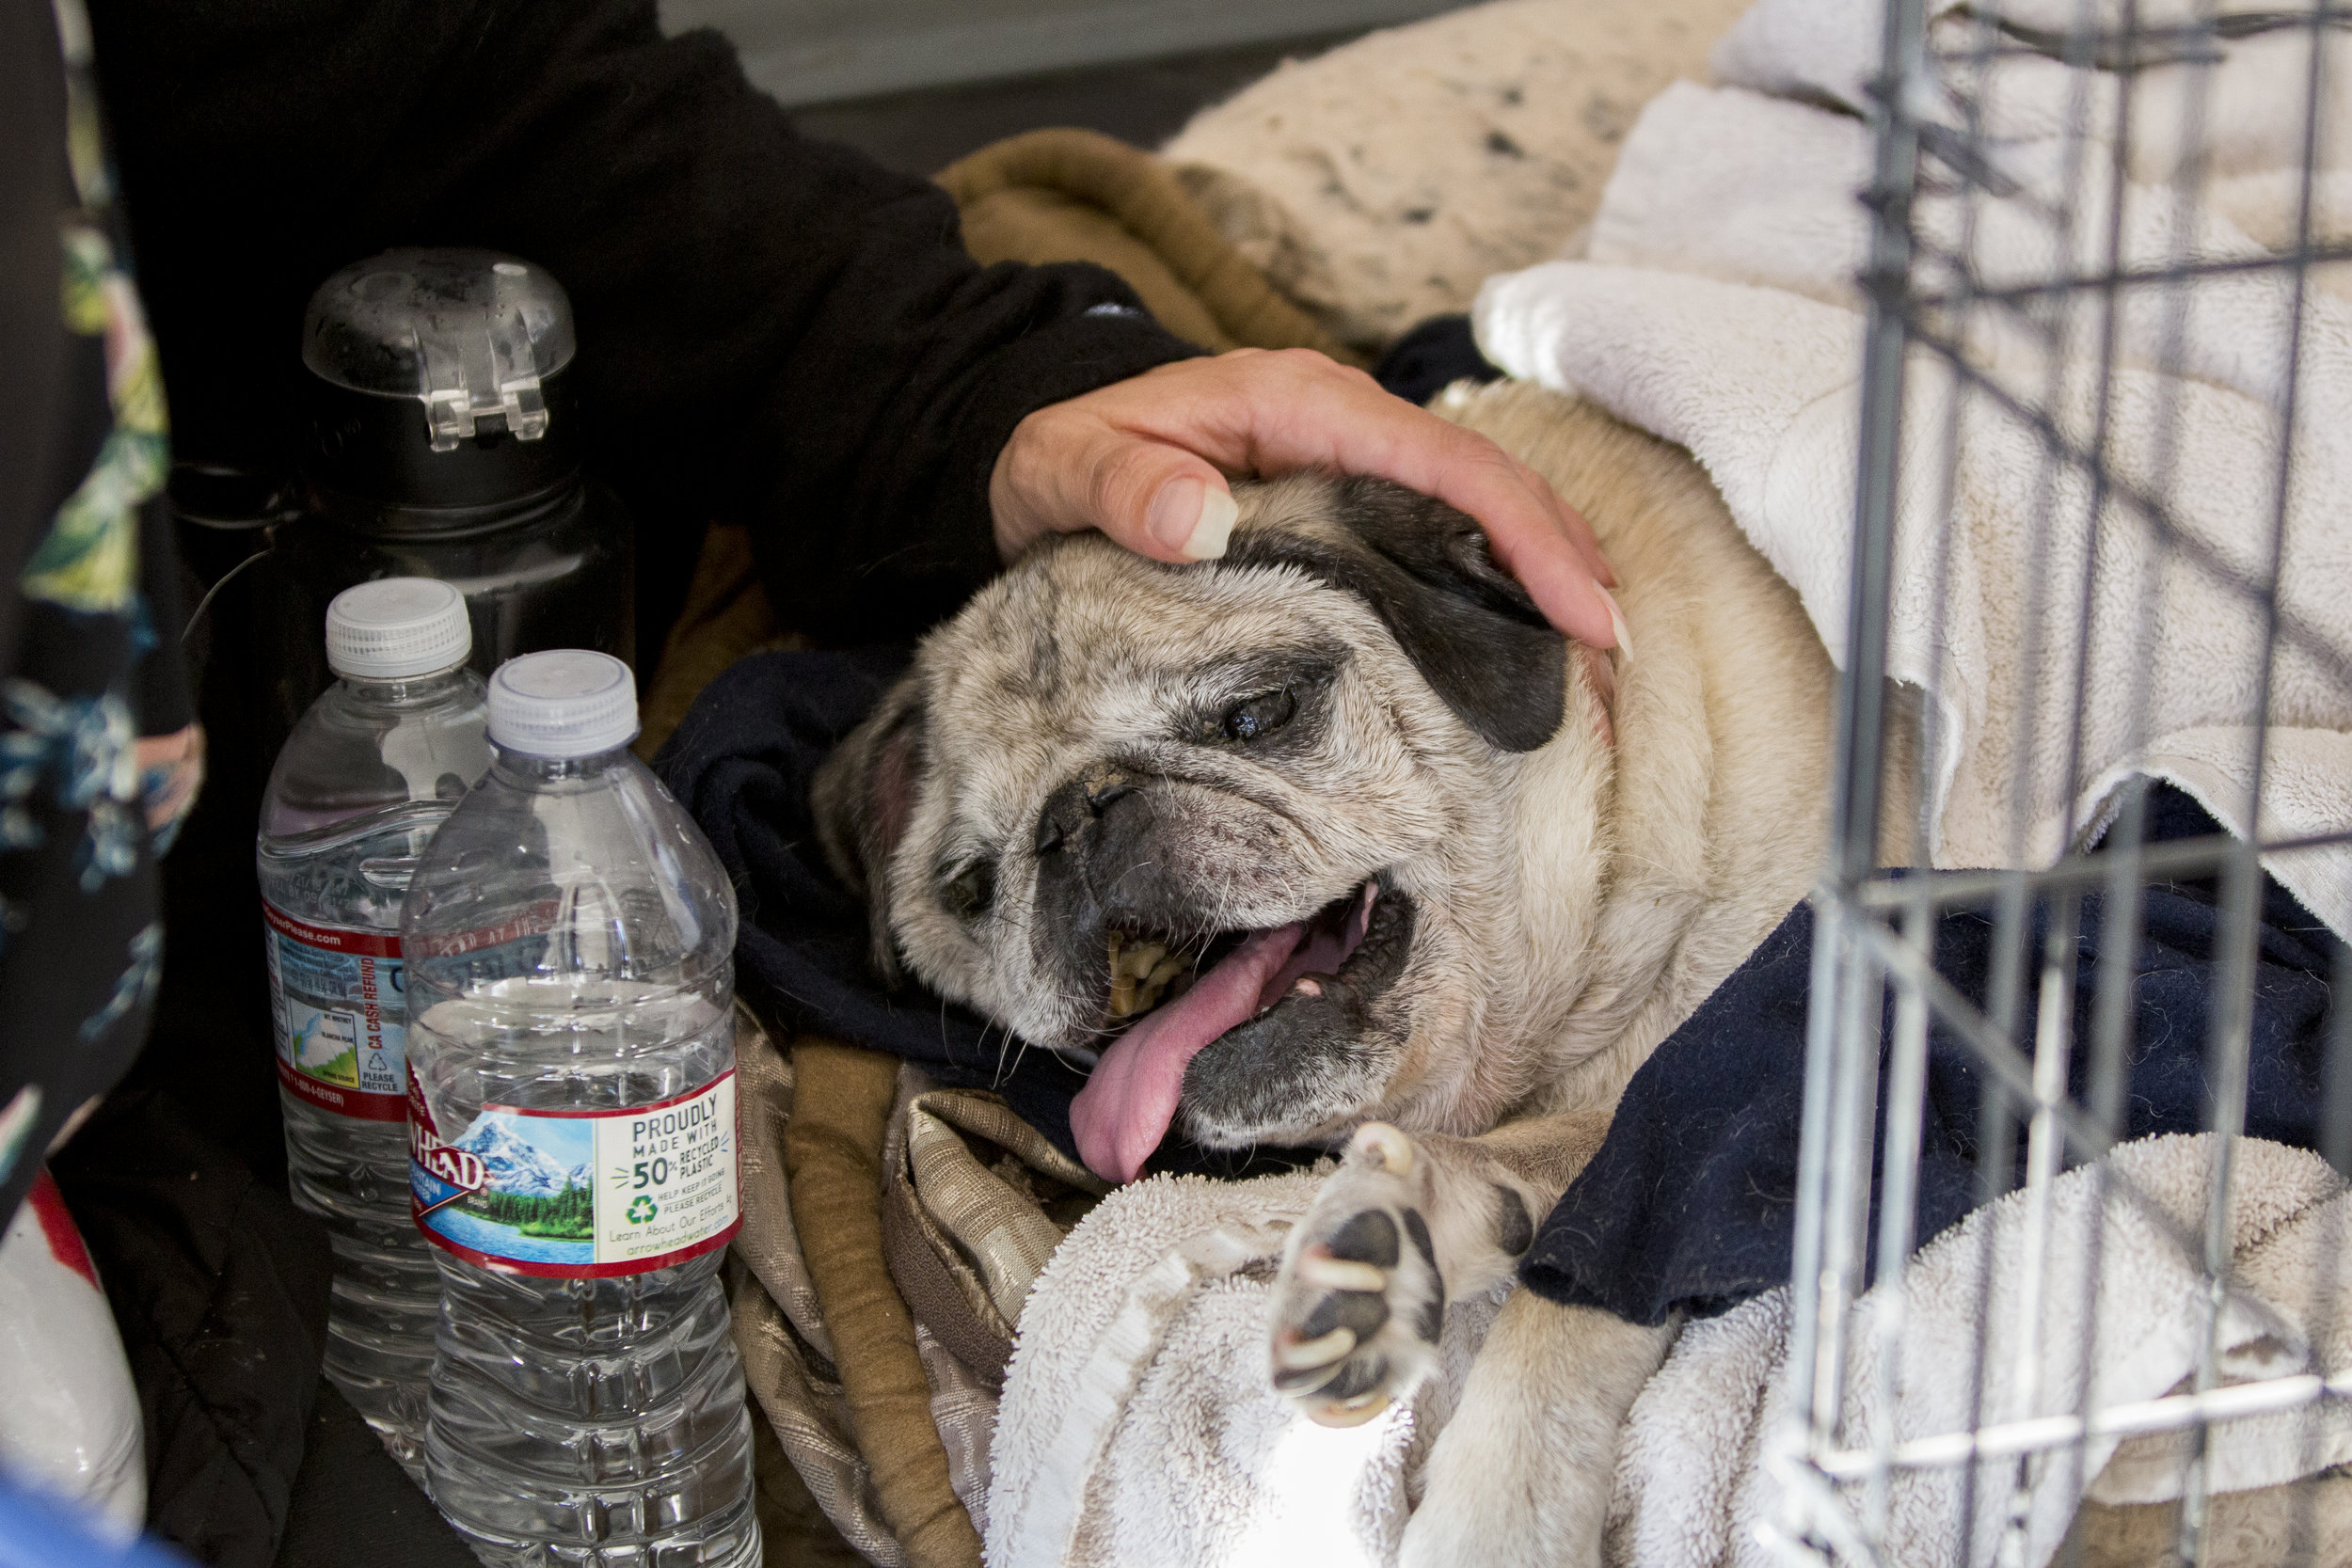  Stephania D'Amore, from Westlake Village, cares for one of her pets, Bogey the pug, while sitting in the hallway at the Woolsey fire evacuation center set up at Los Angeles Pierce College on November 9, 2018 in Woodland Hills, Calif. When asked if s